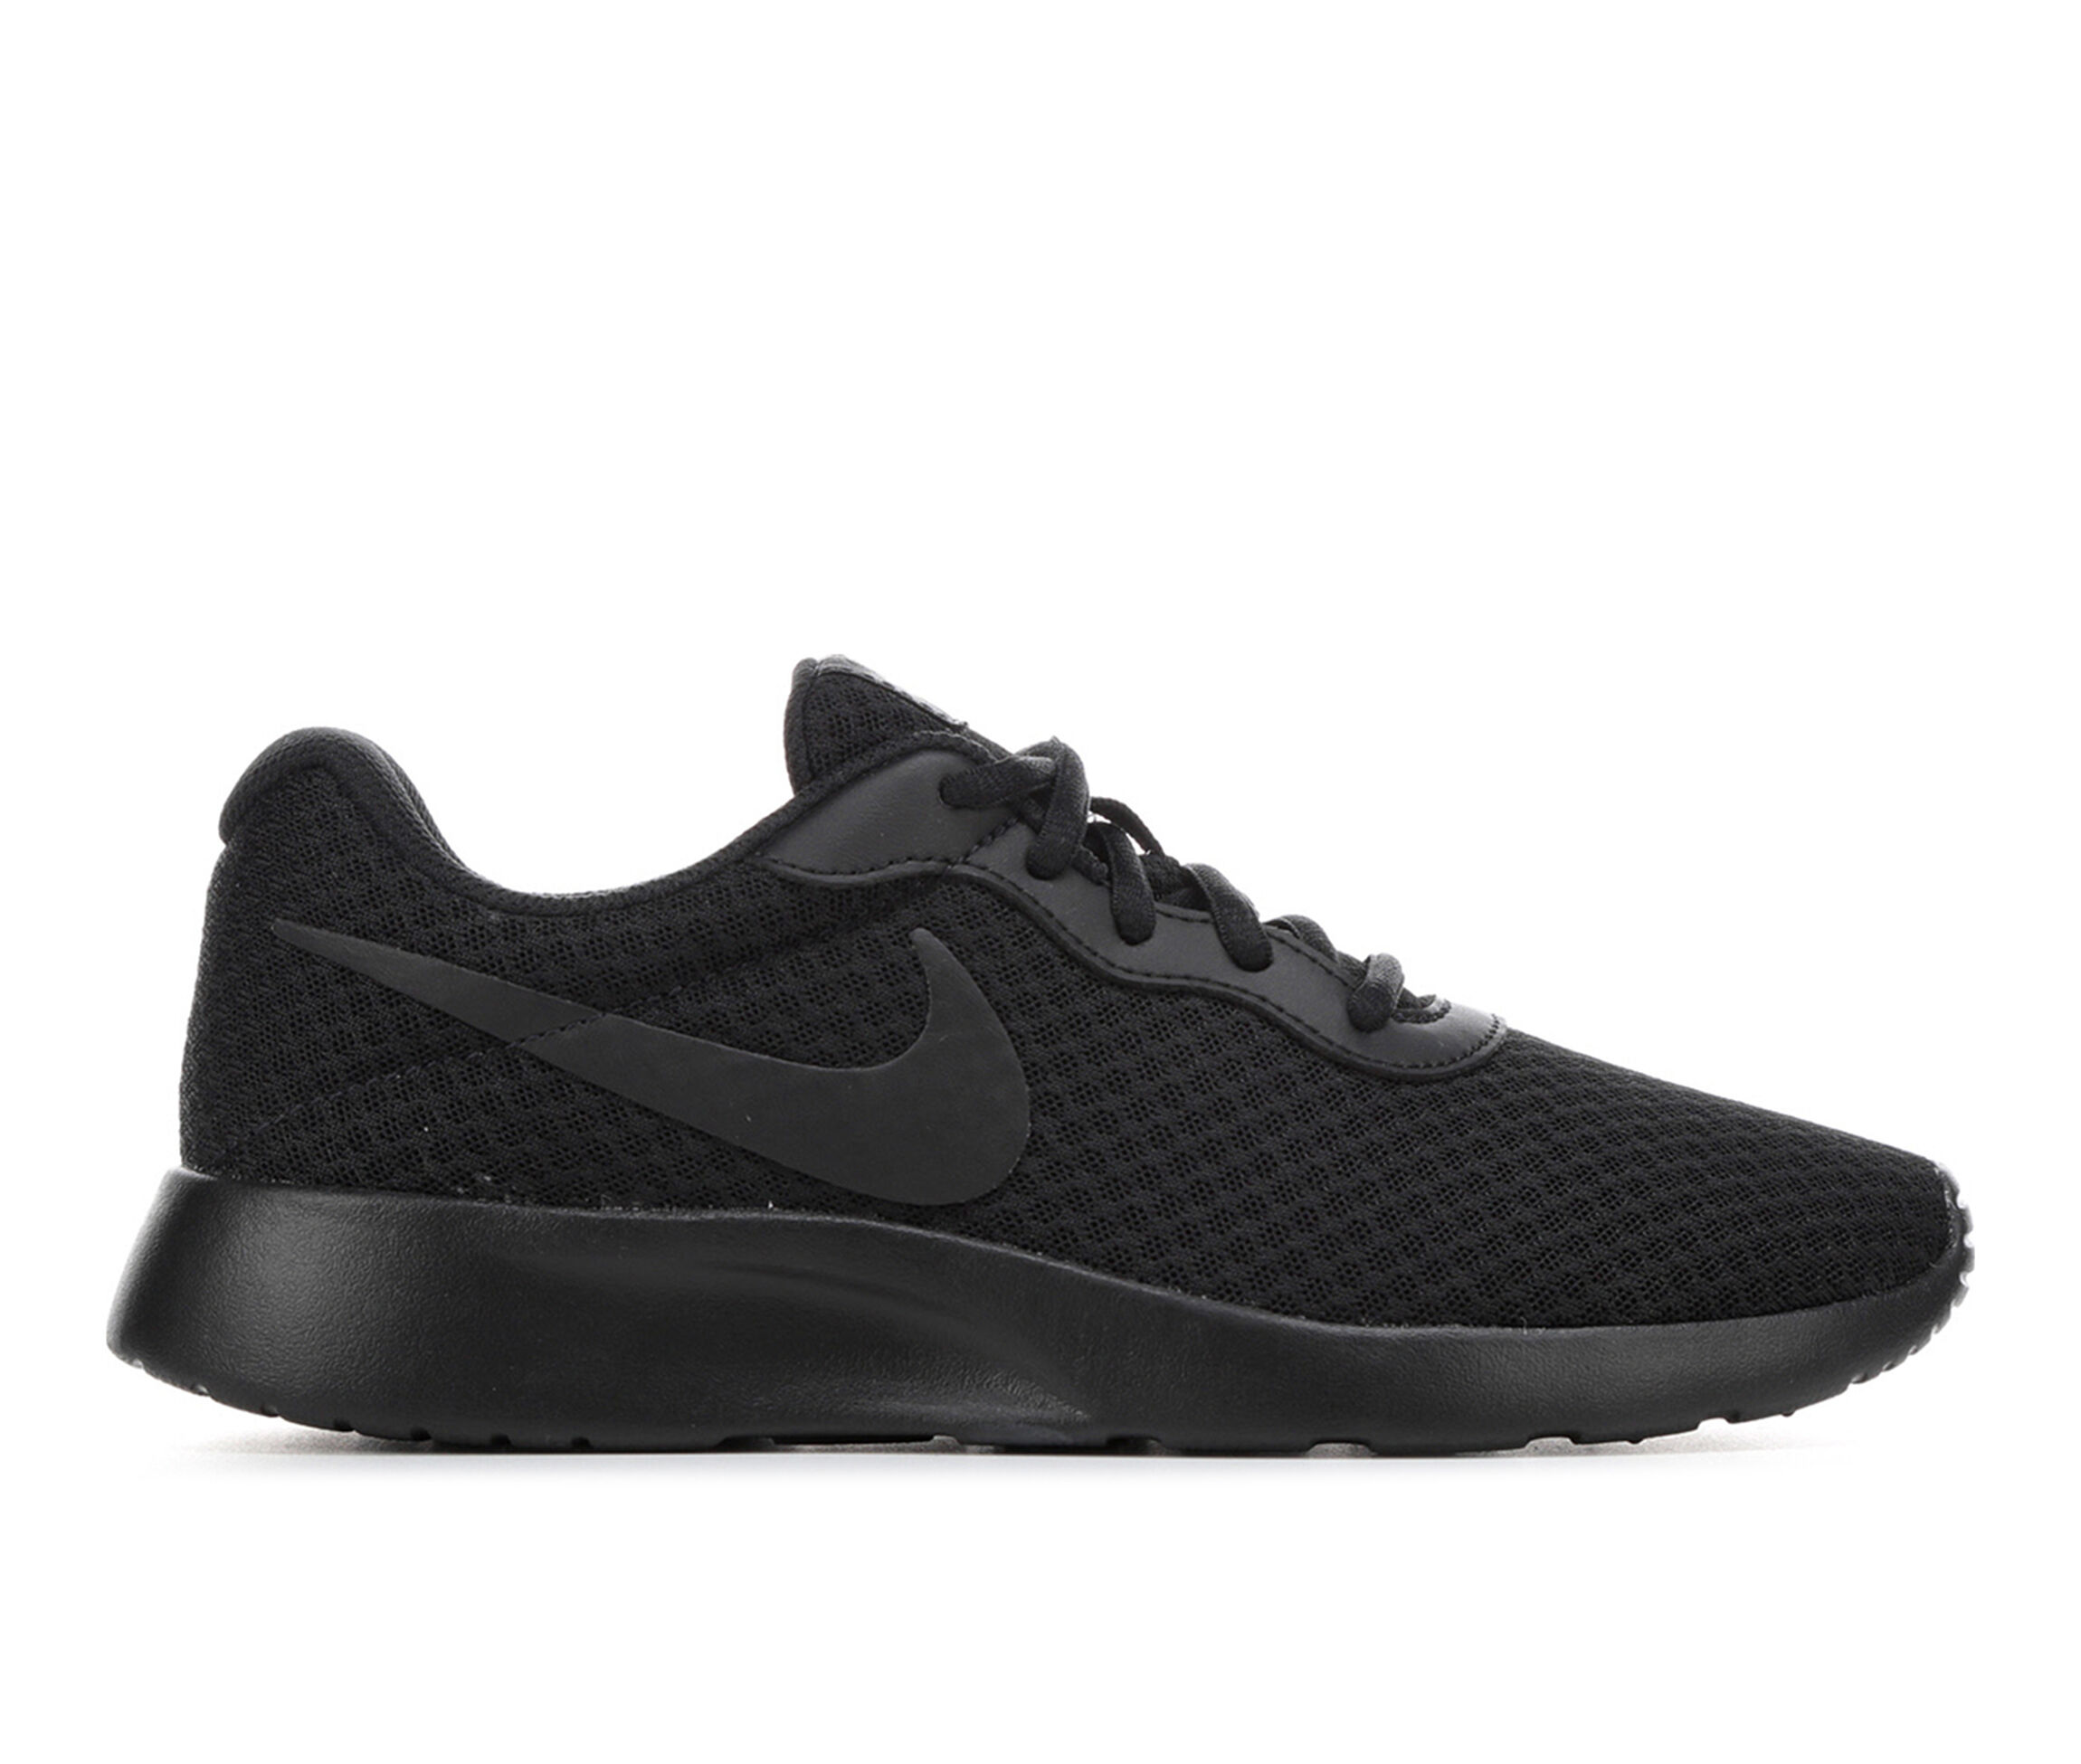 Nike Shoes for Women, Athletic Sneakers | Shoe Carnival